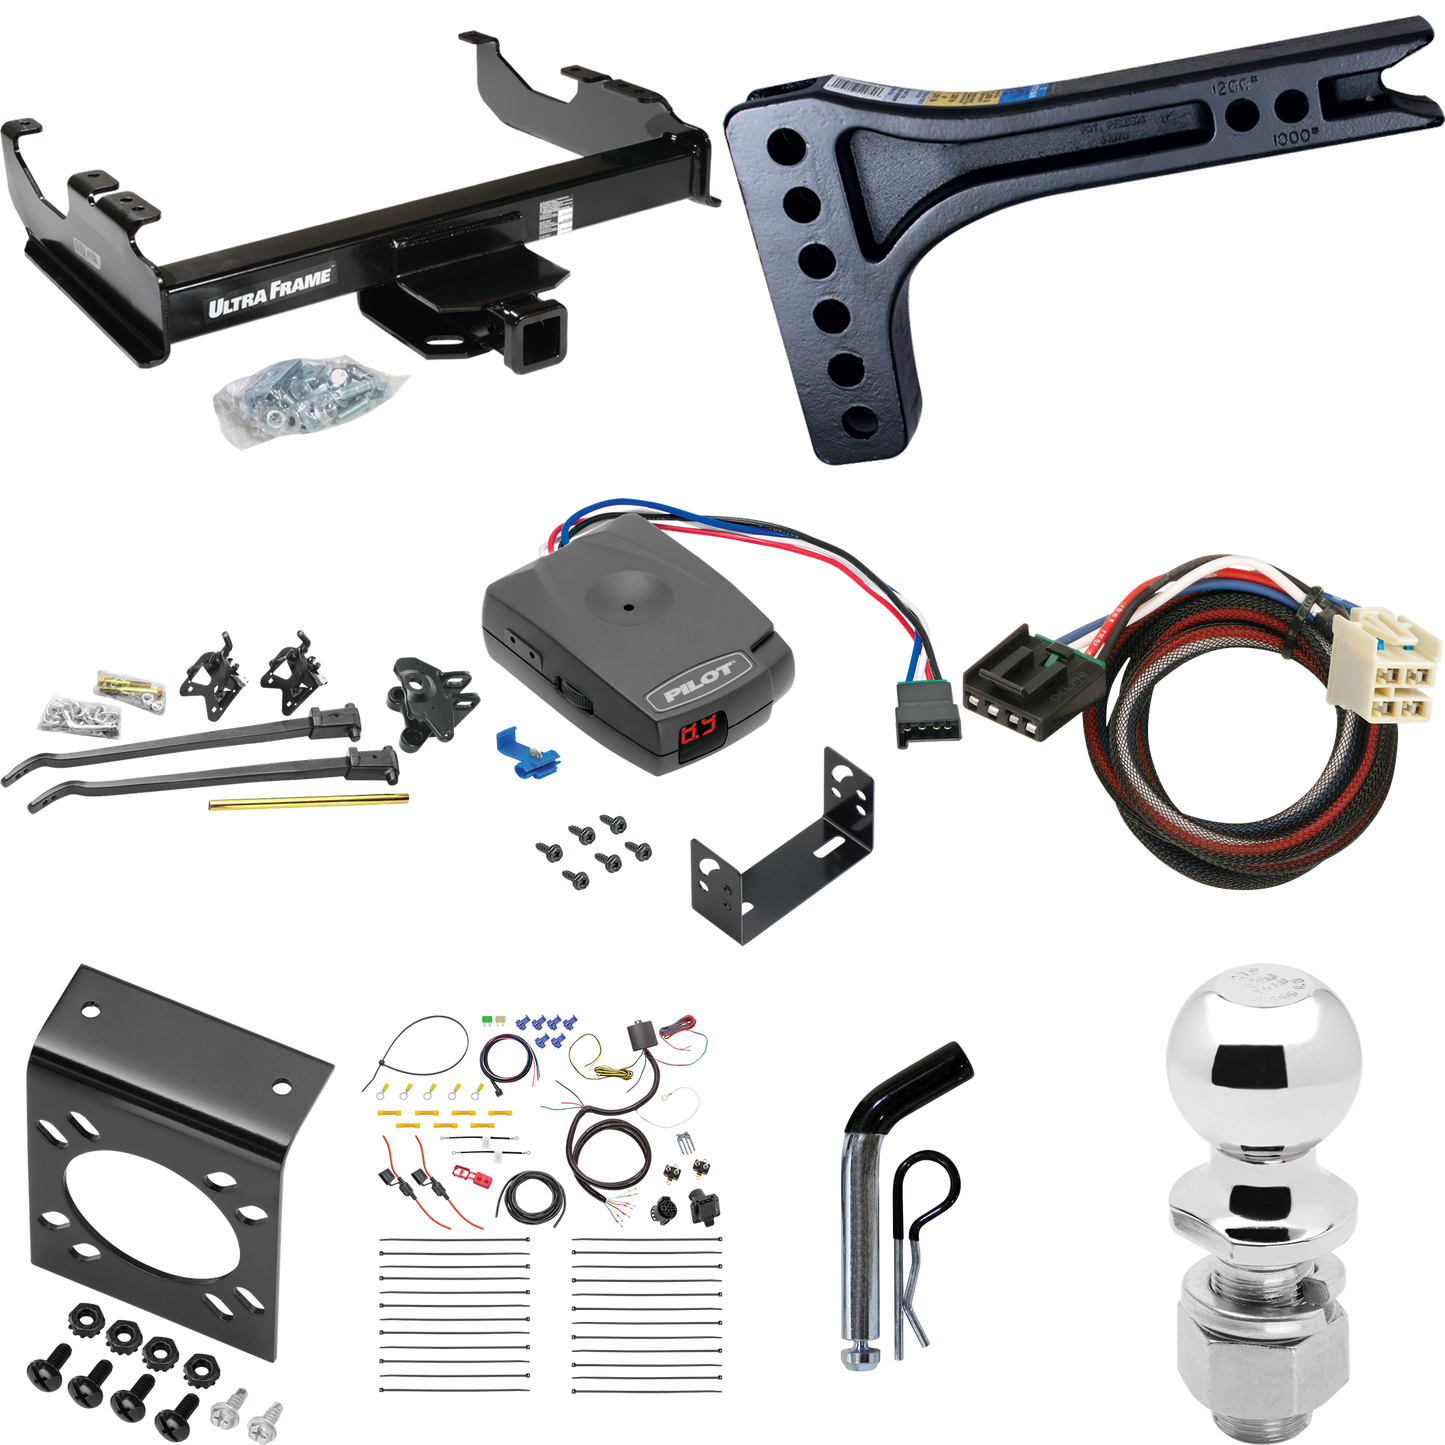 Fits 2015-2019 GMC Sierra 3500 HD Trailer Hitch Tow PKG w/ 15K Trunnion Bar Weight Distribution Hitch + Pin/Clip + 2-5/16" Ball + Pro Series Pilot Brake Control + Plug & Play BC Adapter + 7-Way RV Wiring (For Cab & Chassis, w/34" Wide Frames Models)